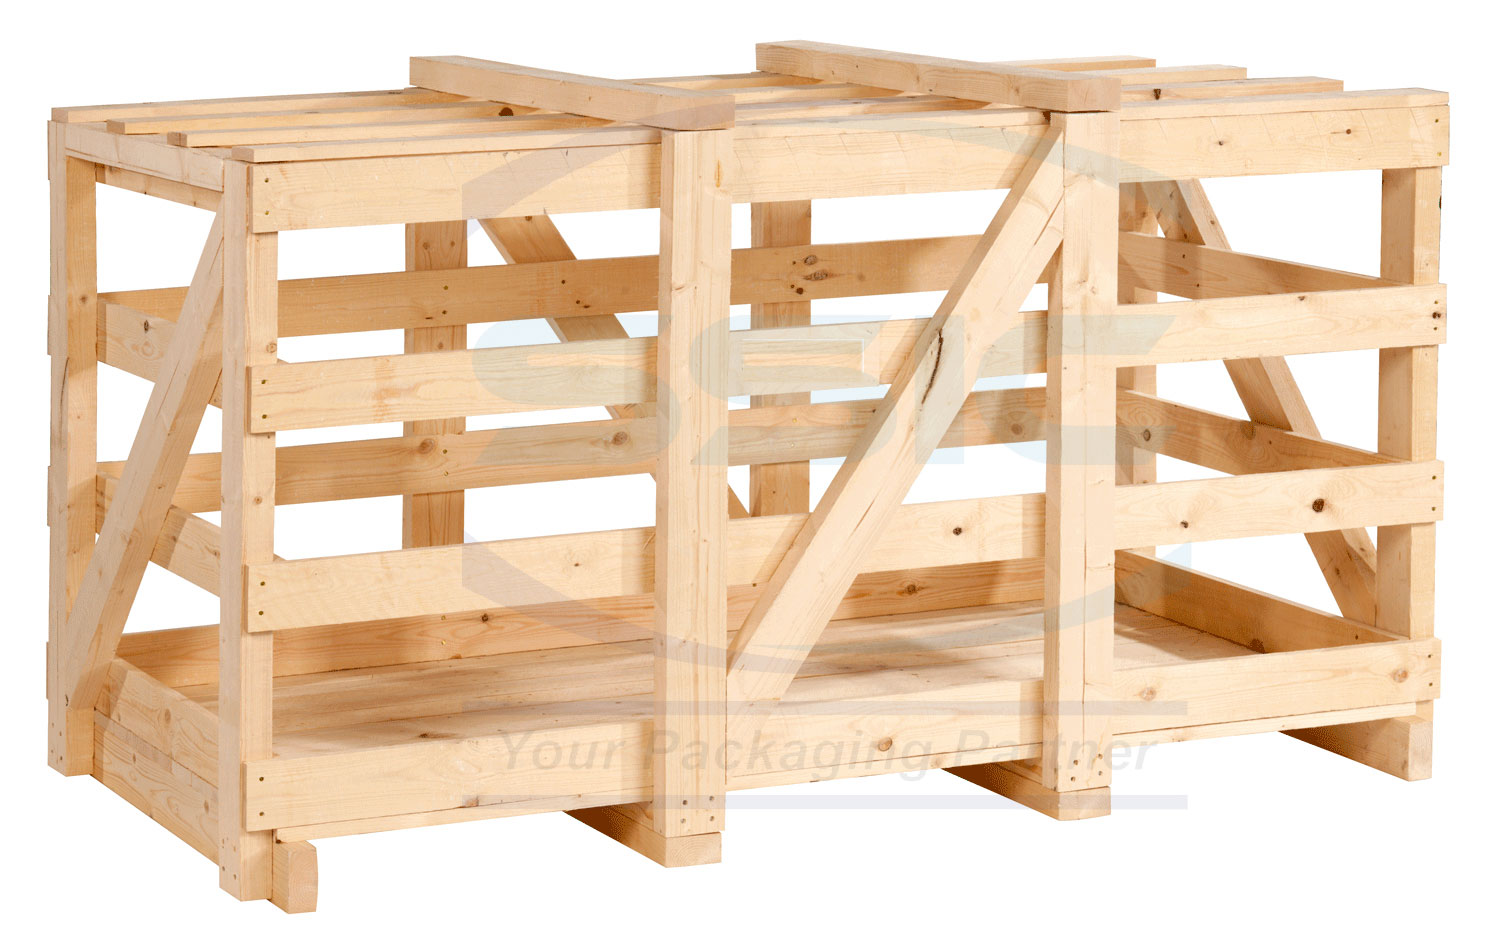 Pine Wood Packing Crates Manufacturers, Suppliers in Pune, Pimpri Chinchwad (PCMC)